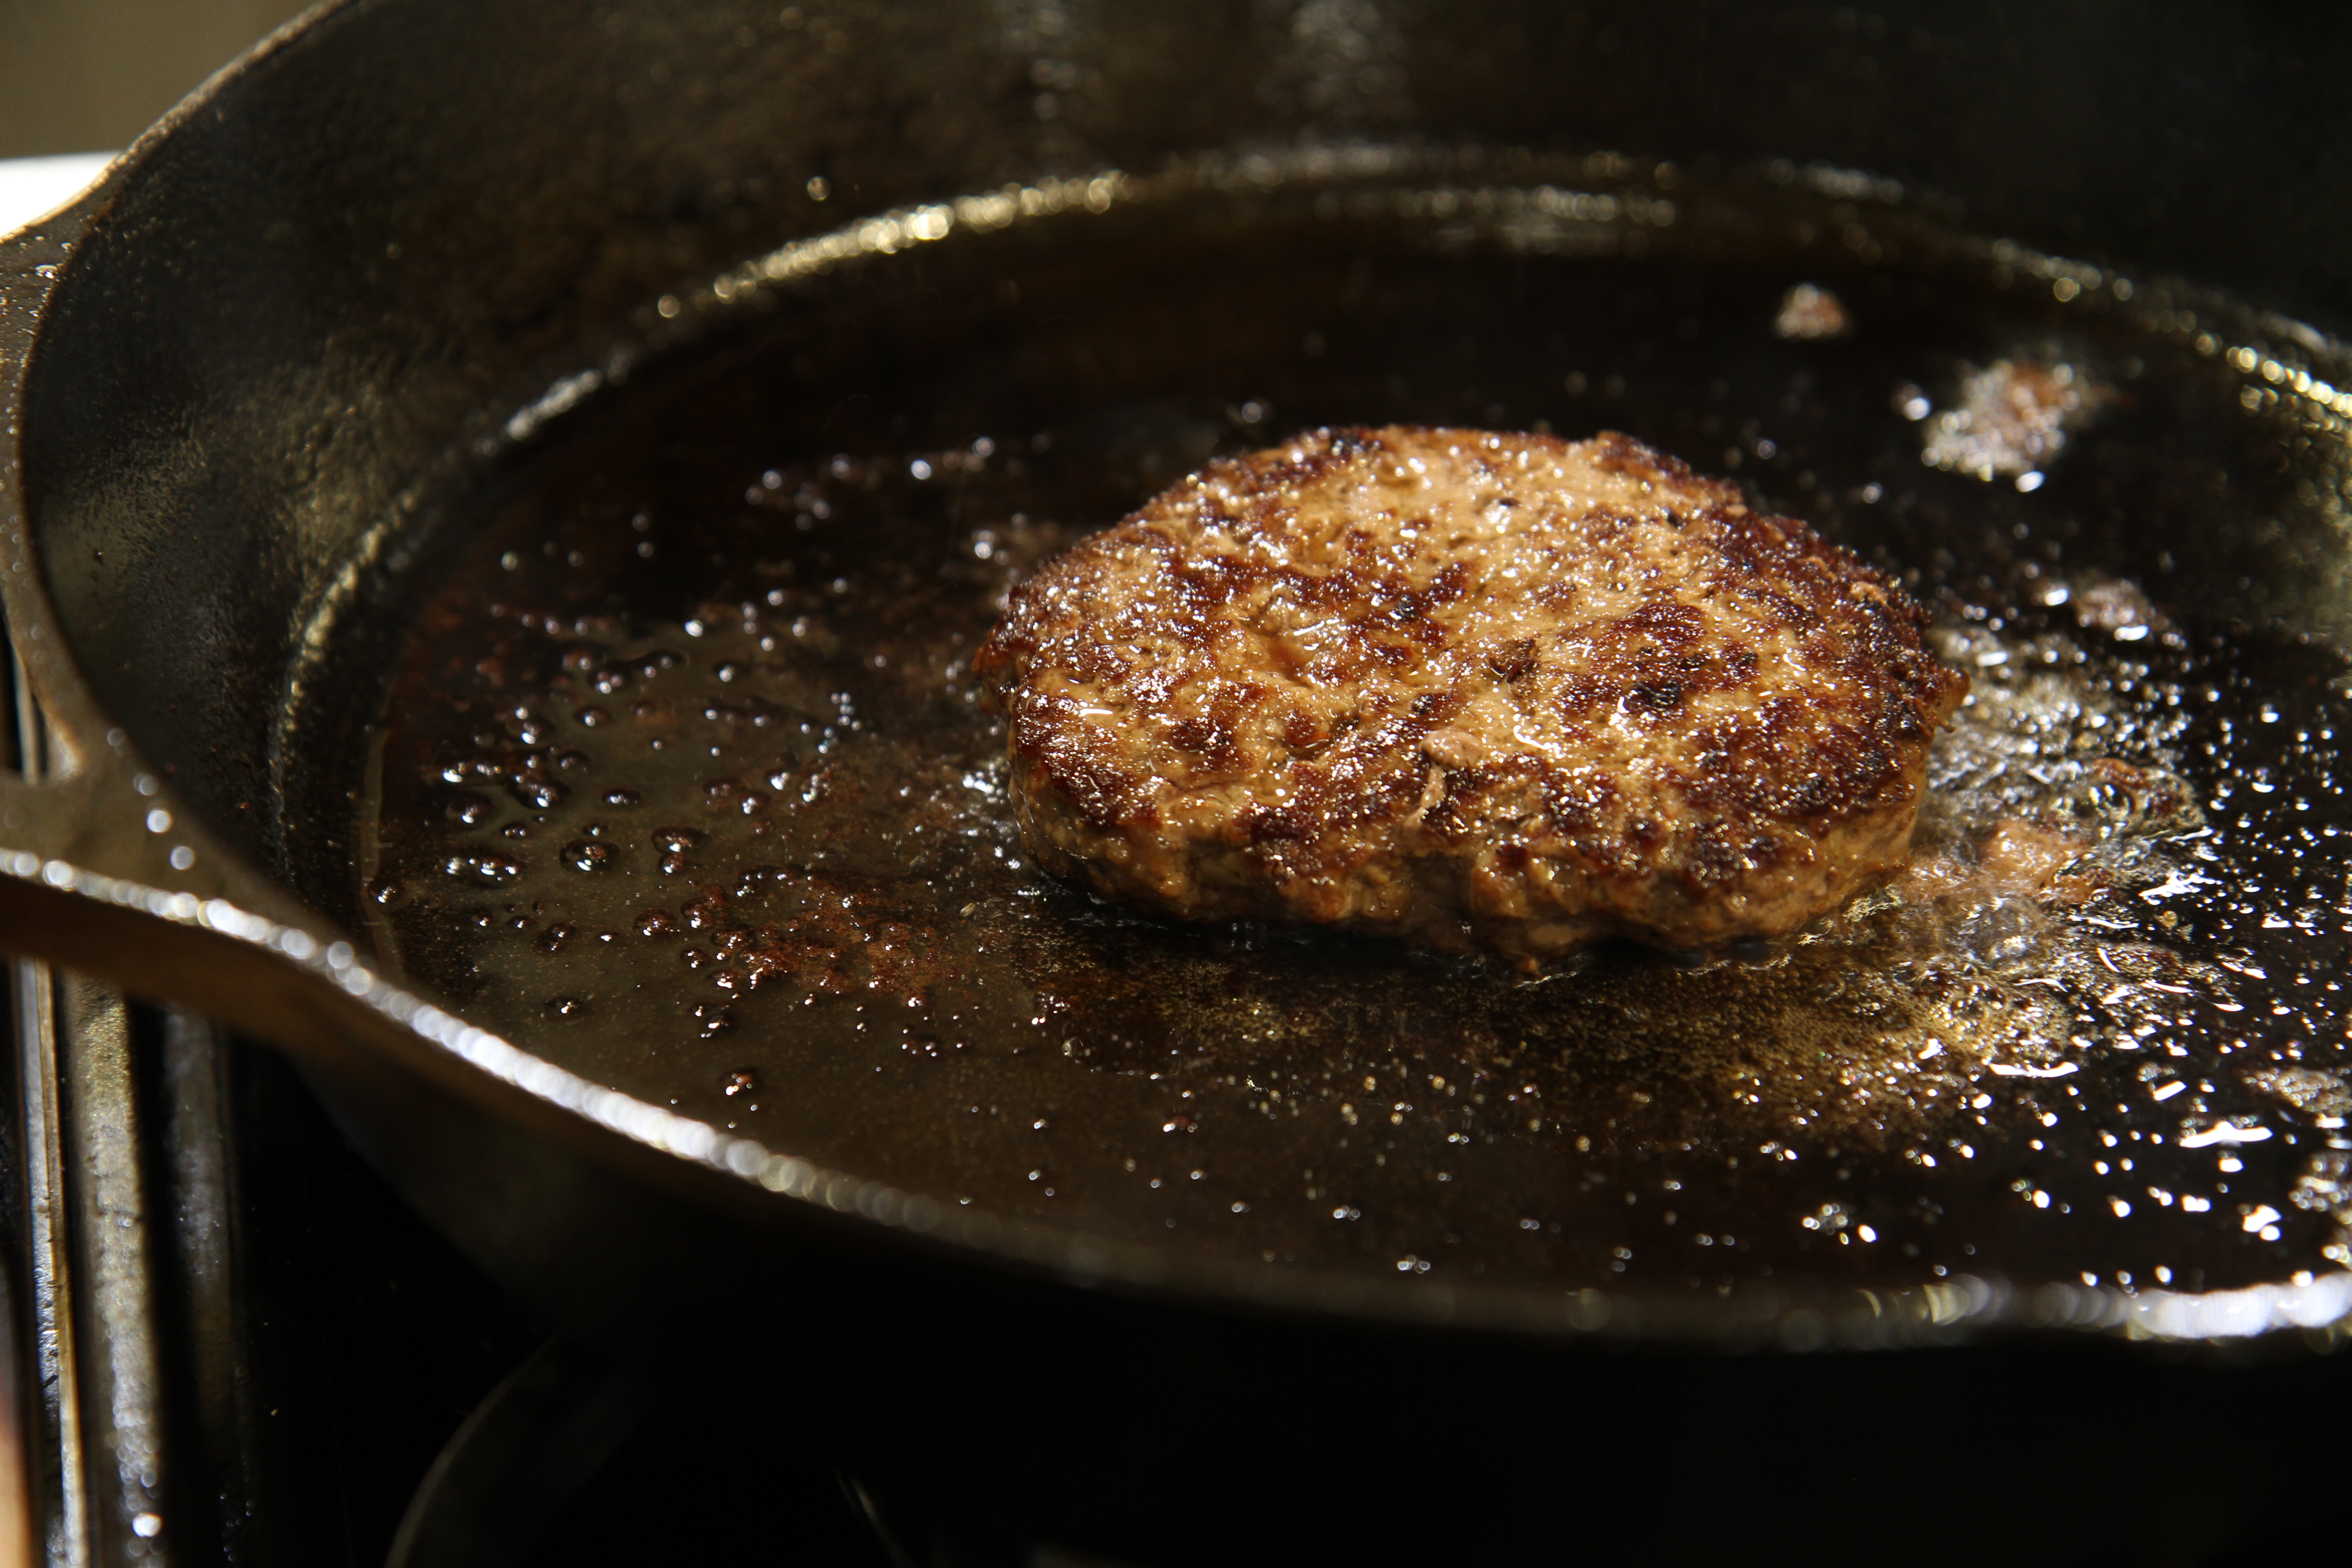 Cooing burger on cast iron pan